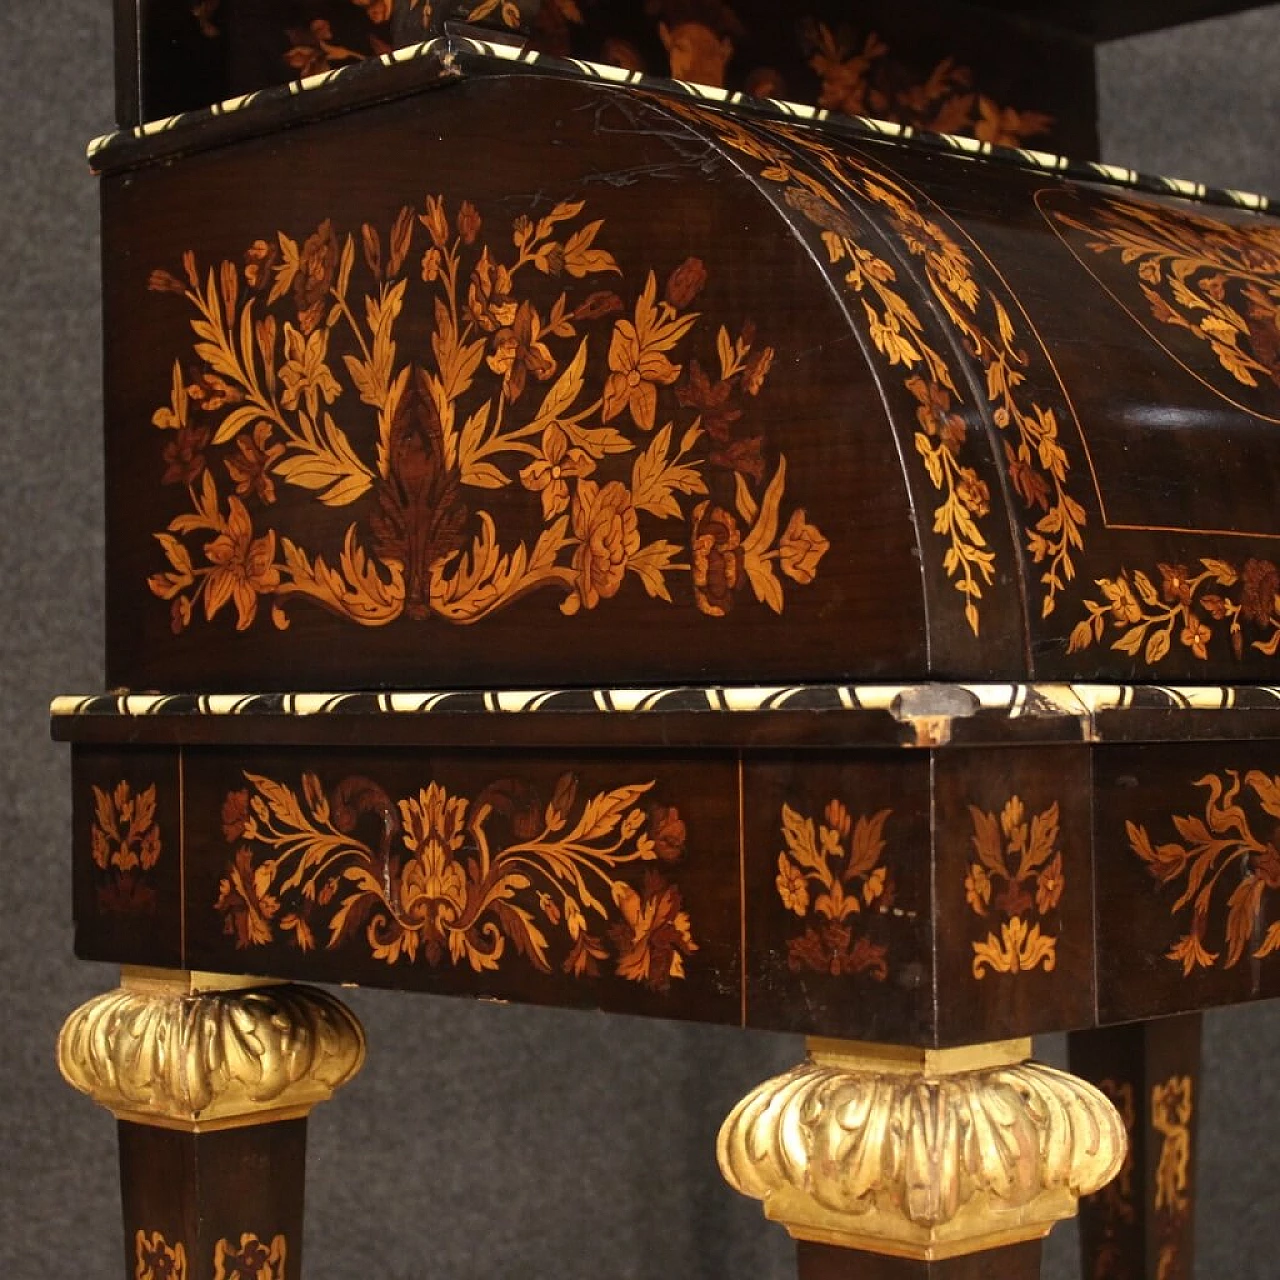 Inlaid French writing desk in Napoleon III style, early 20th century 1304408